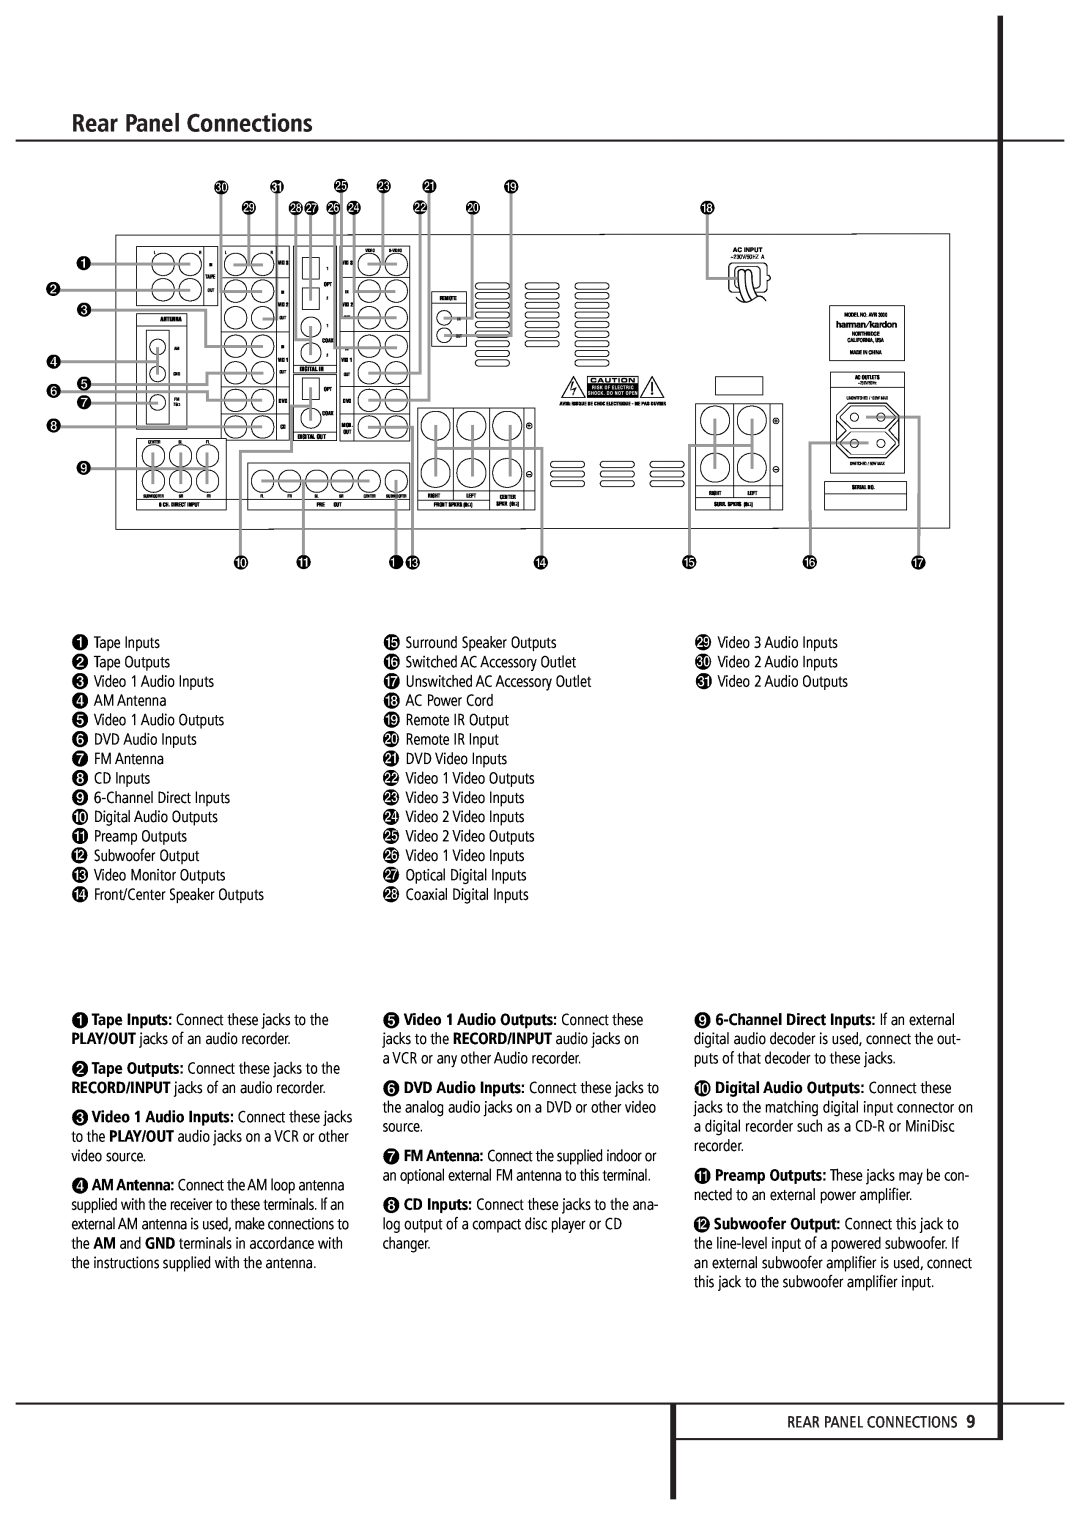 Harman-Kardon AVR 3000 owner manual Rear Panel Connections, Digital Audio Outputs Connect these 